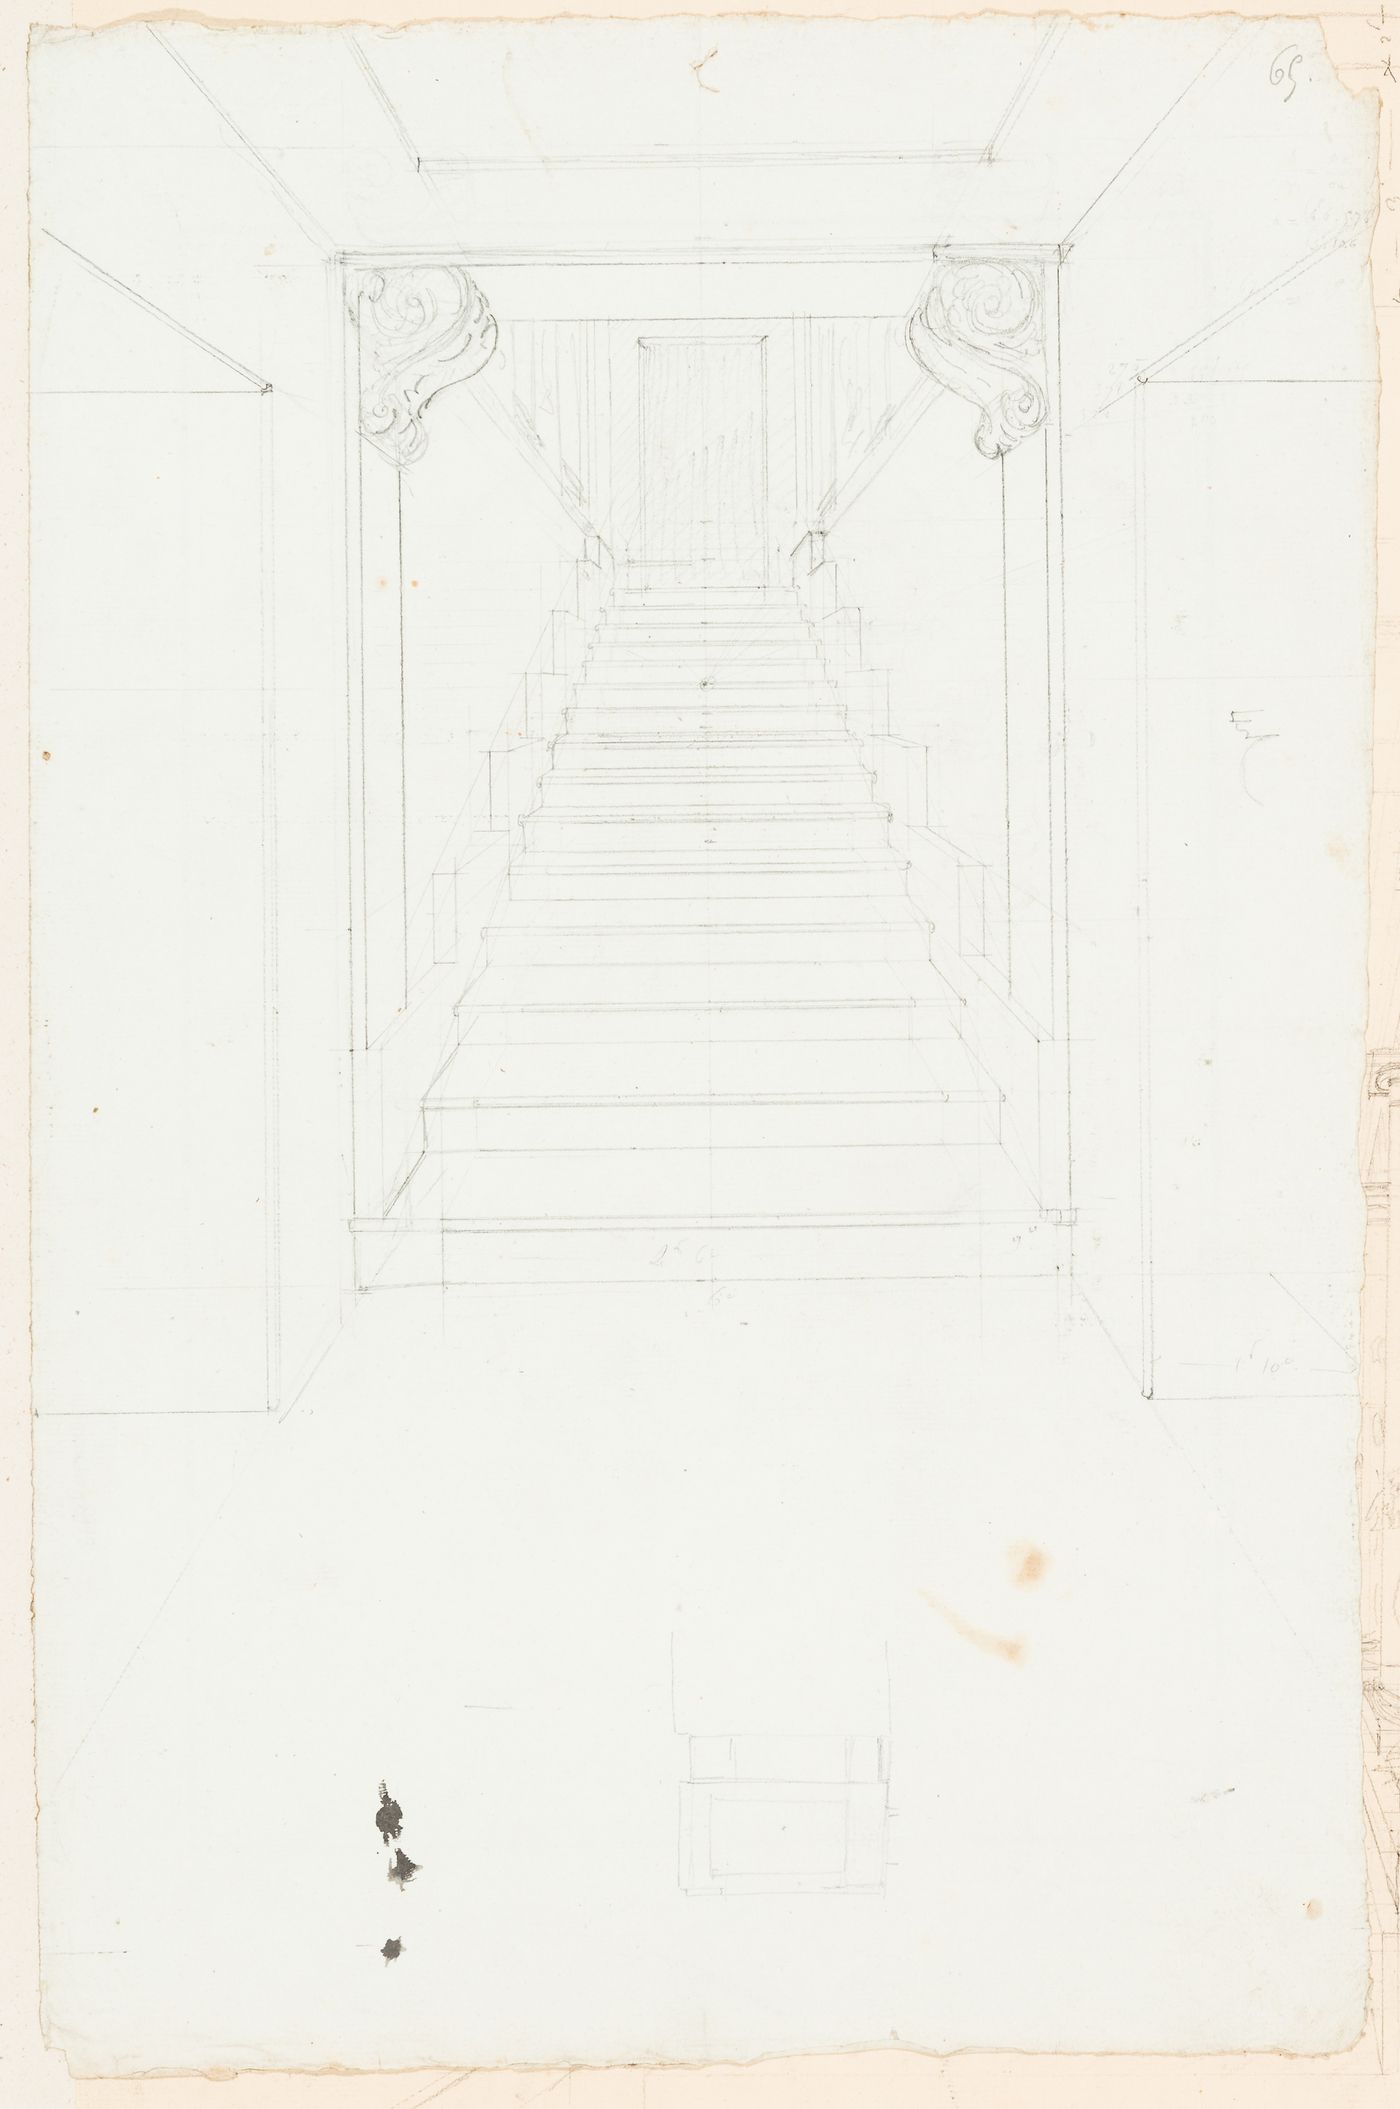 Rohault de Fleury House, 12-14 rue d'Aguesseau, Paris: Interior perspective showing the main staircase from the "soubassement"; verso: Exercise in descriptive geometry